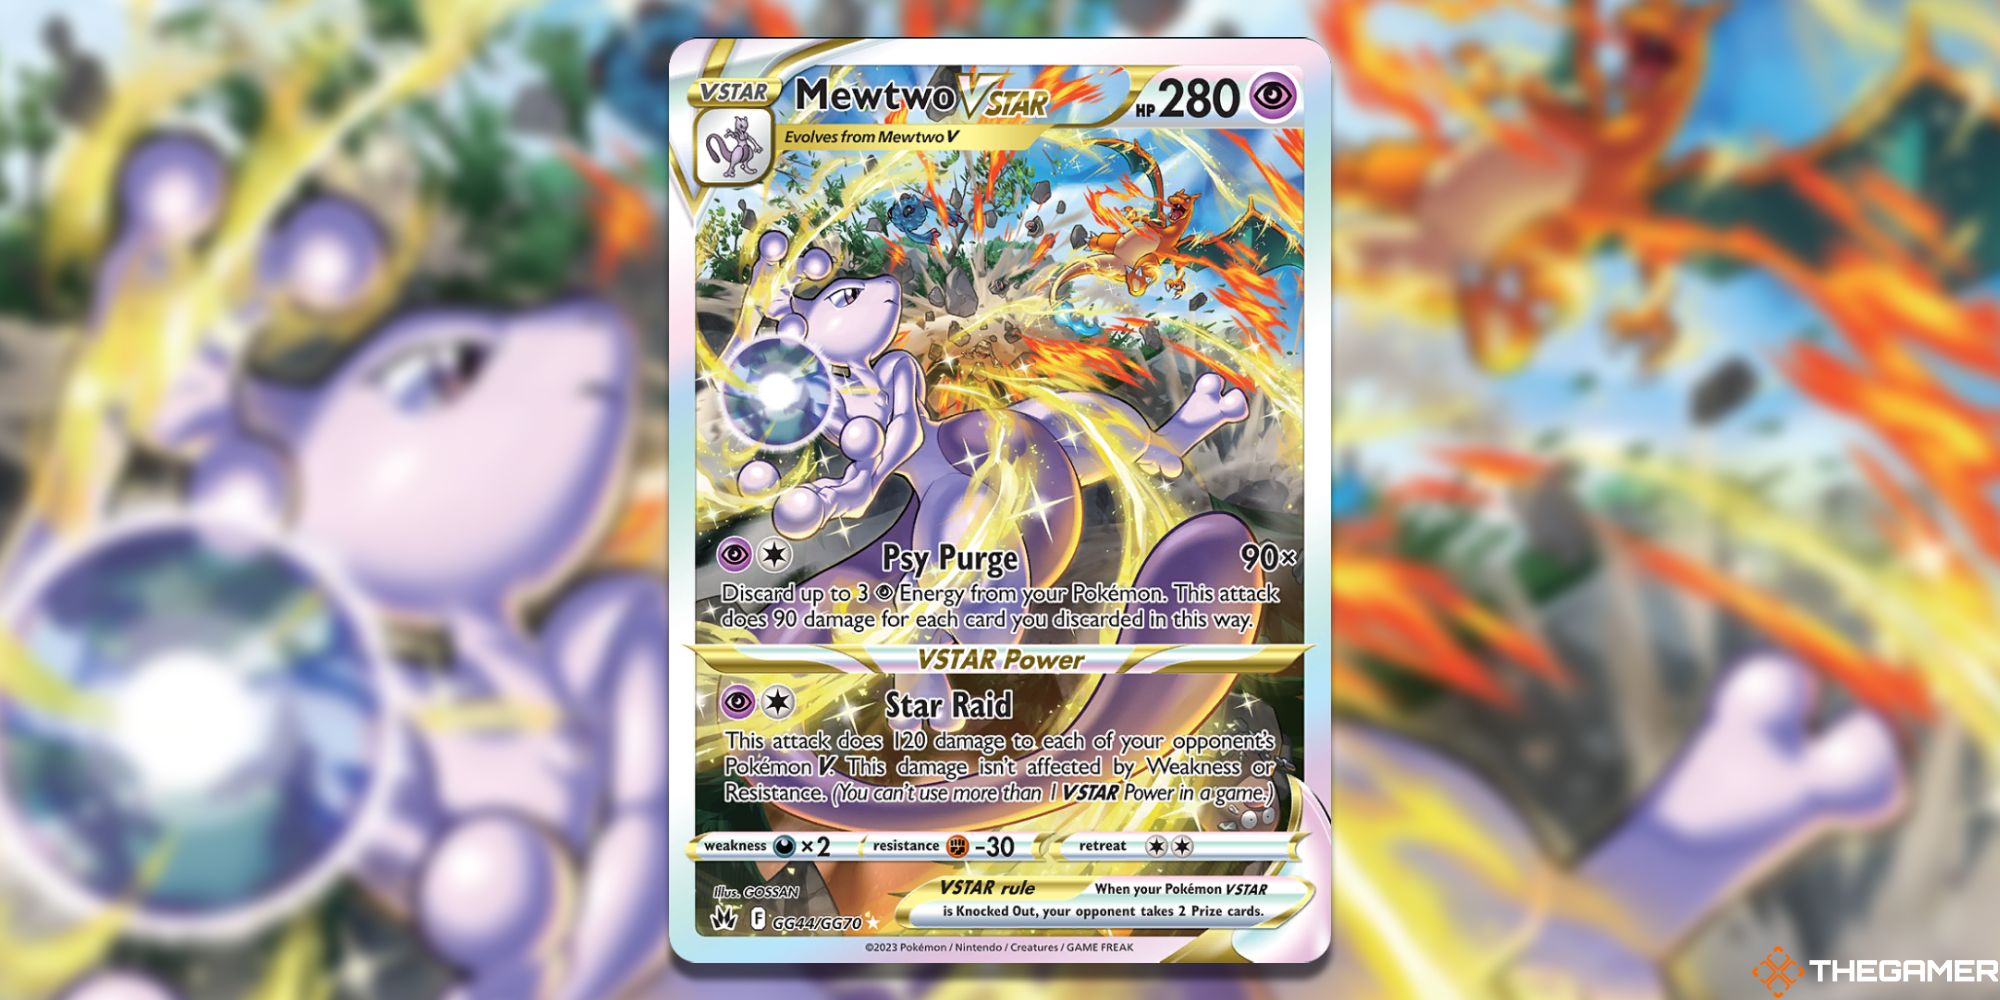 Image of the card Mewtwo VSTAR in Pokemon TCG, with art by Gossan